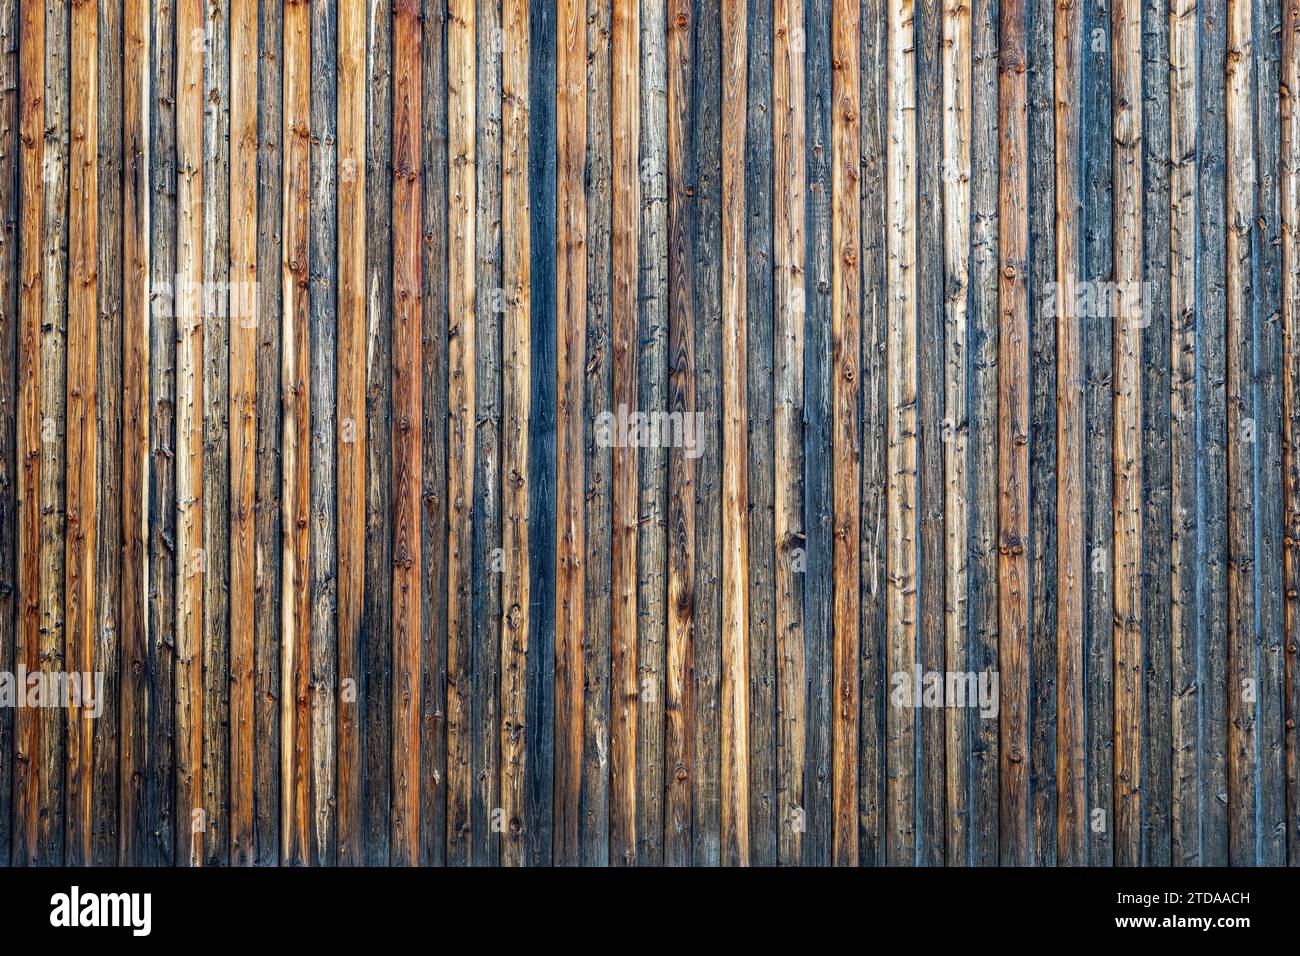 Grey barn wooden wall planking texture. hardwood dark weathered timber surface. old solid wood slats rustic shabby gray background. grunge faded wood Stock Photo